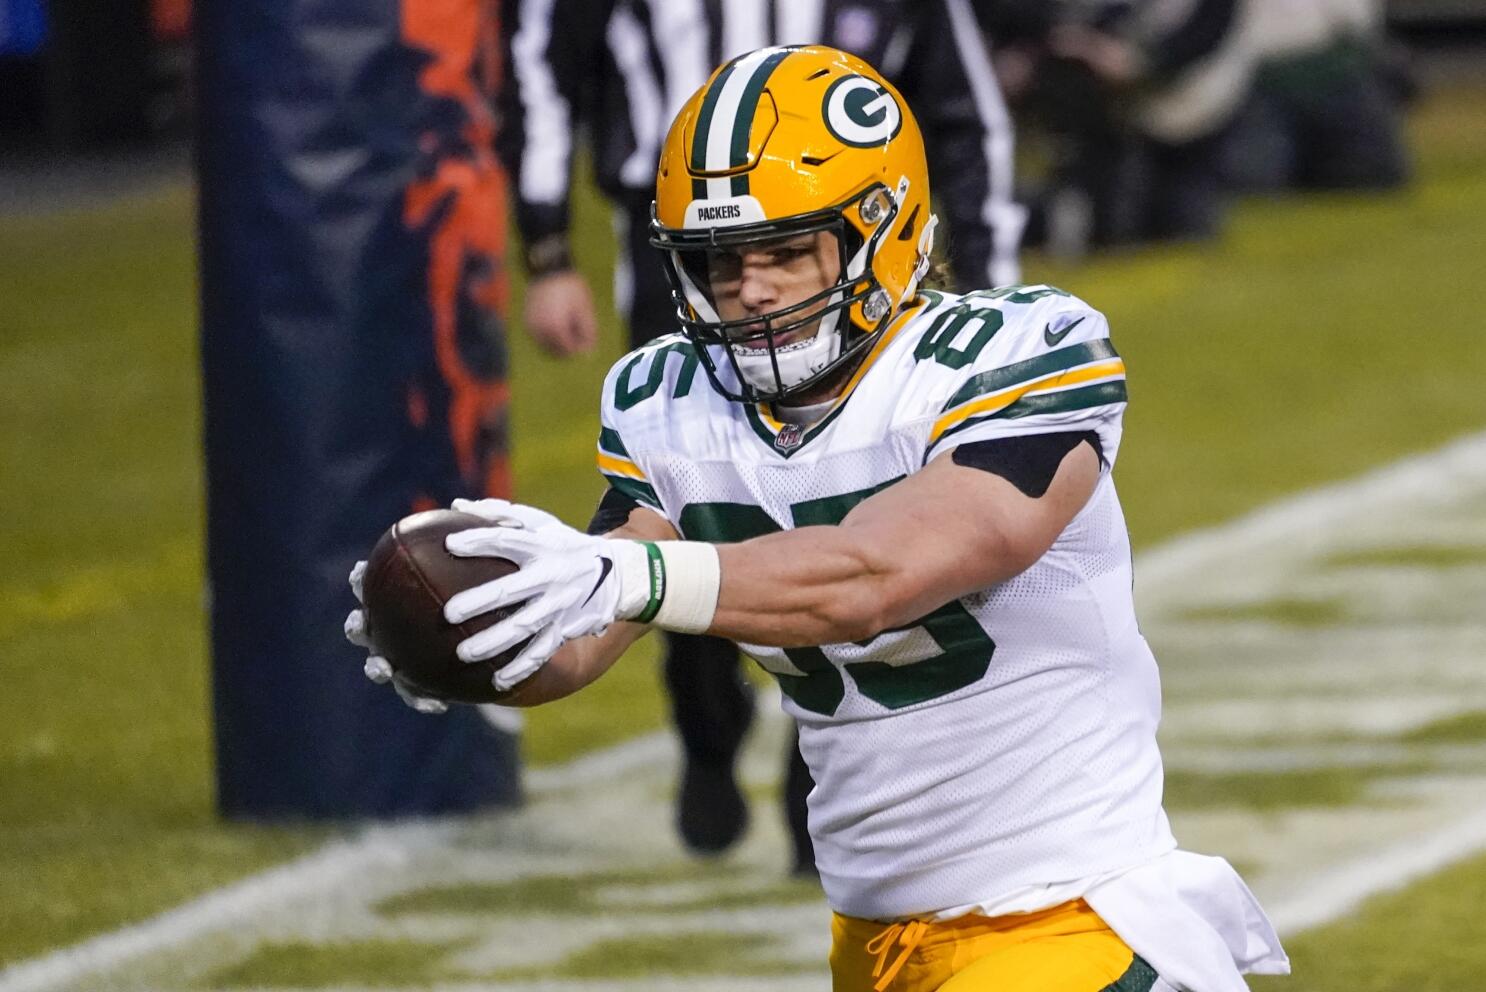 Indiana State ties connect Packers tight ends Tonyan, Dafney - The San  Diego Union-Tribune